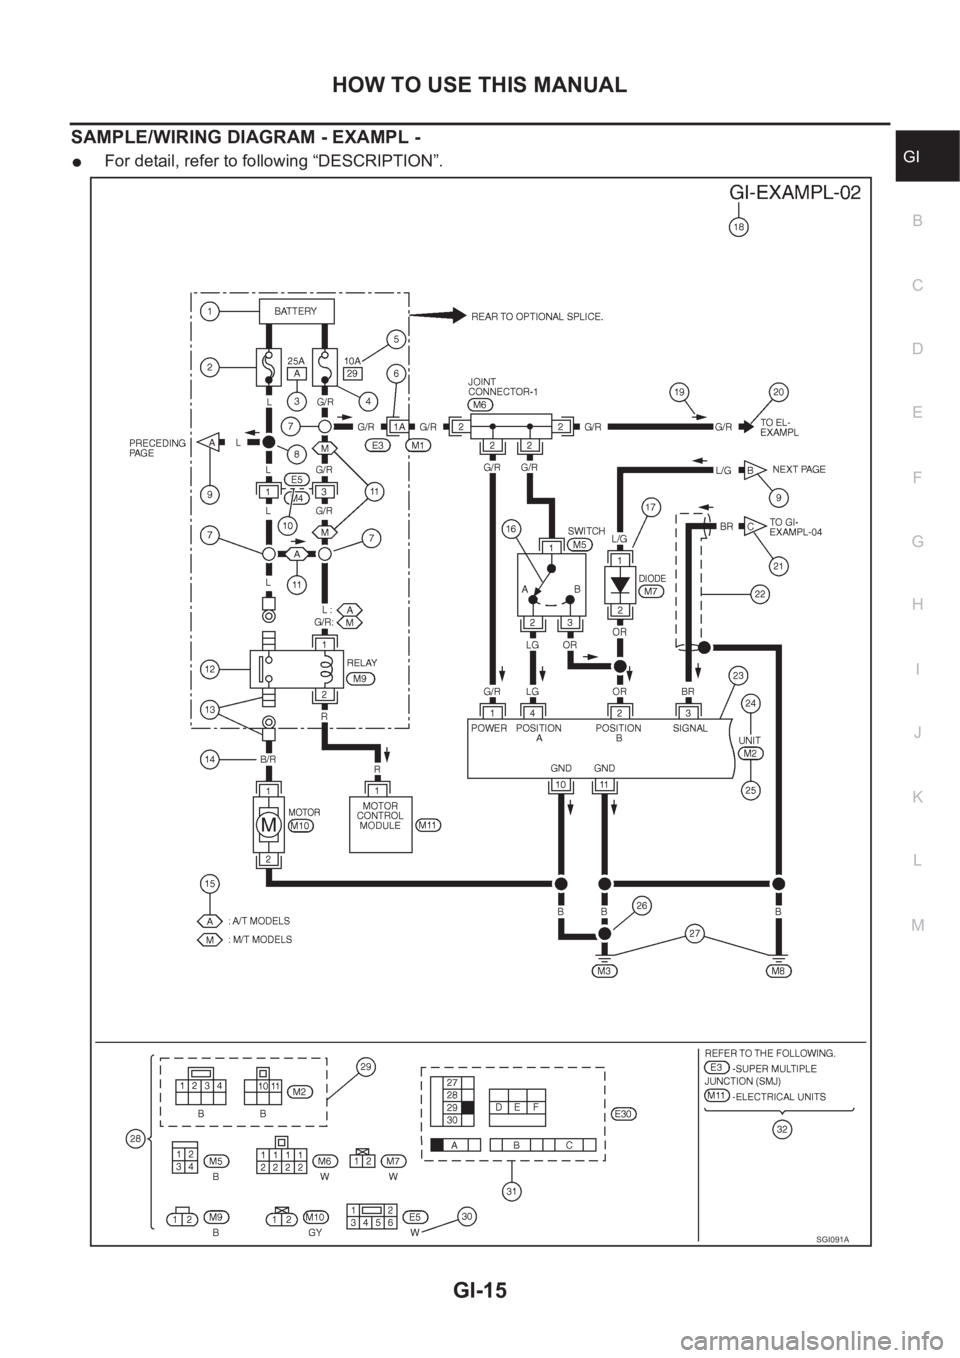 NISSAN X-TRAIL 2001  Service User Guide HOW TO USE THIS MANUAL
GI-15
C
D
E
F
G
H
I
J
K
L
MB
GI
SAMPLE/WIRING DIAGRAM - EXAMPL - 
●For detail, refer to following “DESCRIPTION”.
SGI091A 